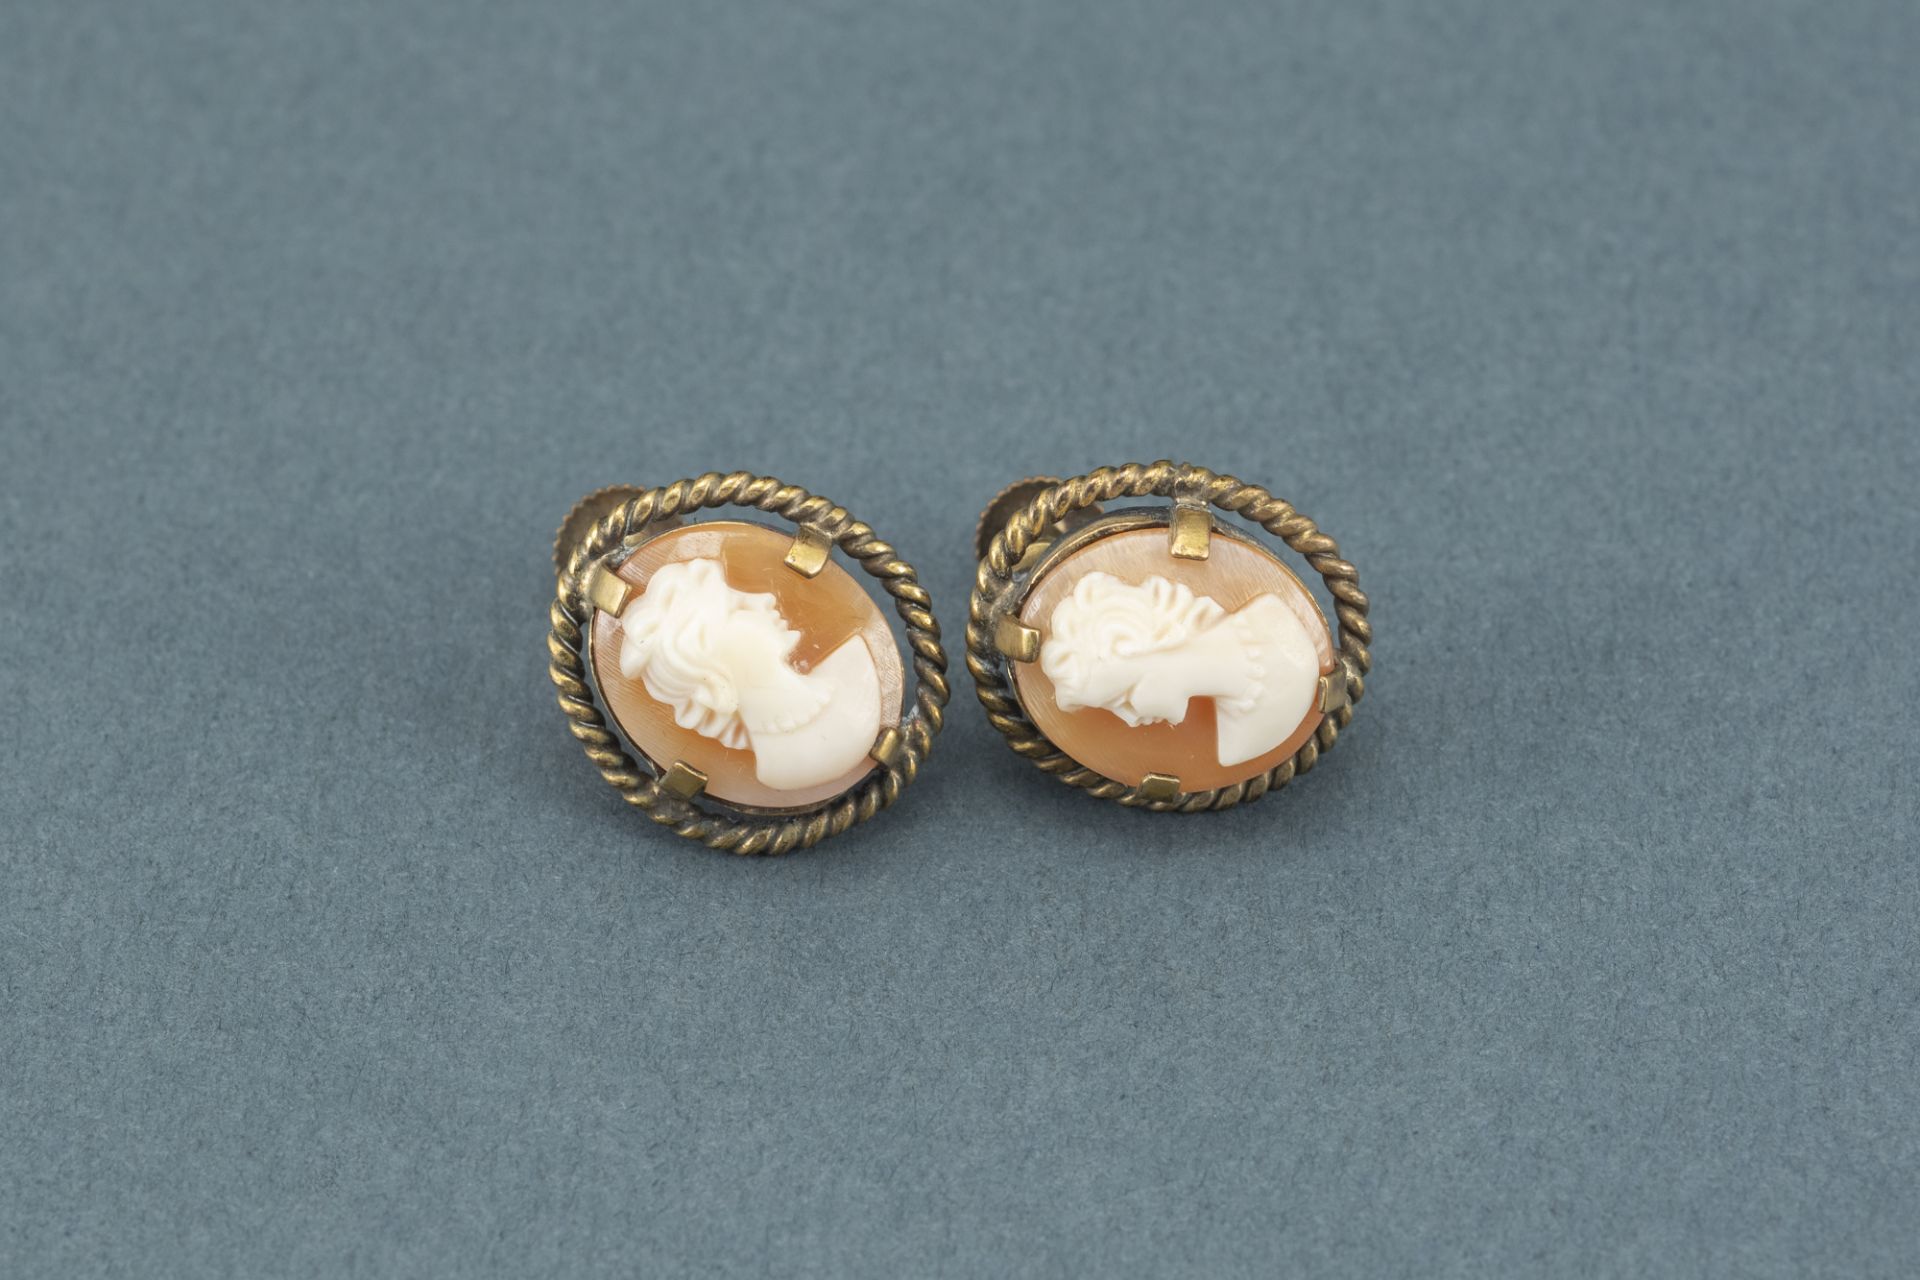 Shell cameo gold earrings - Image 2 of 4